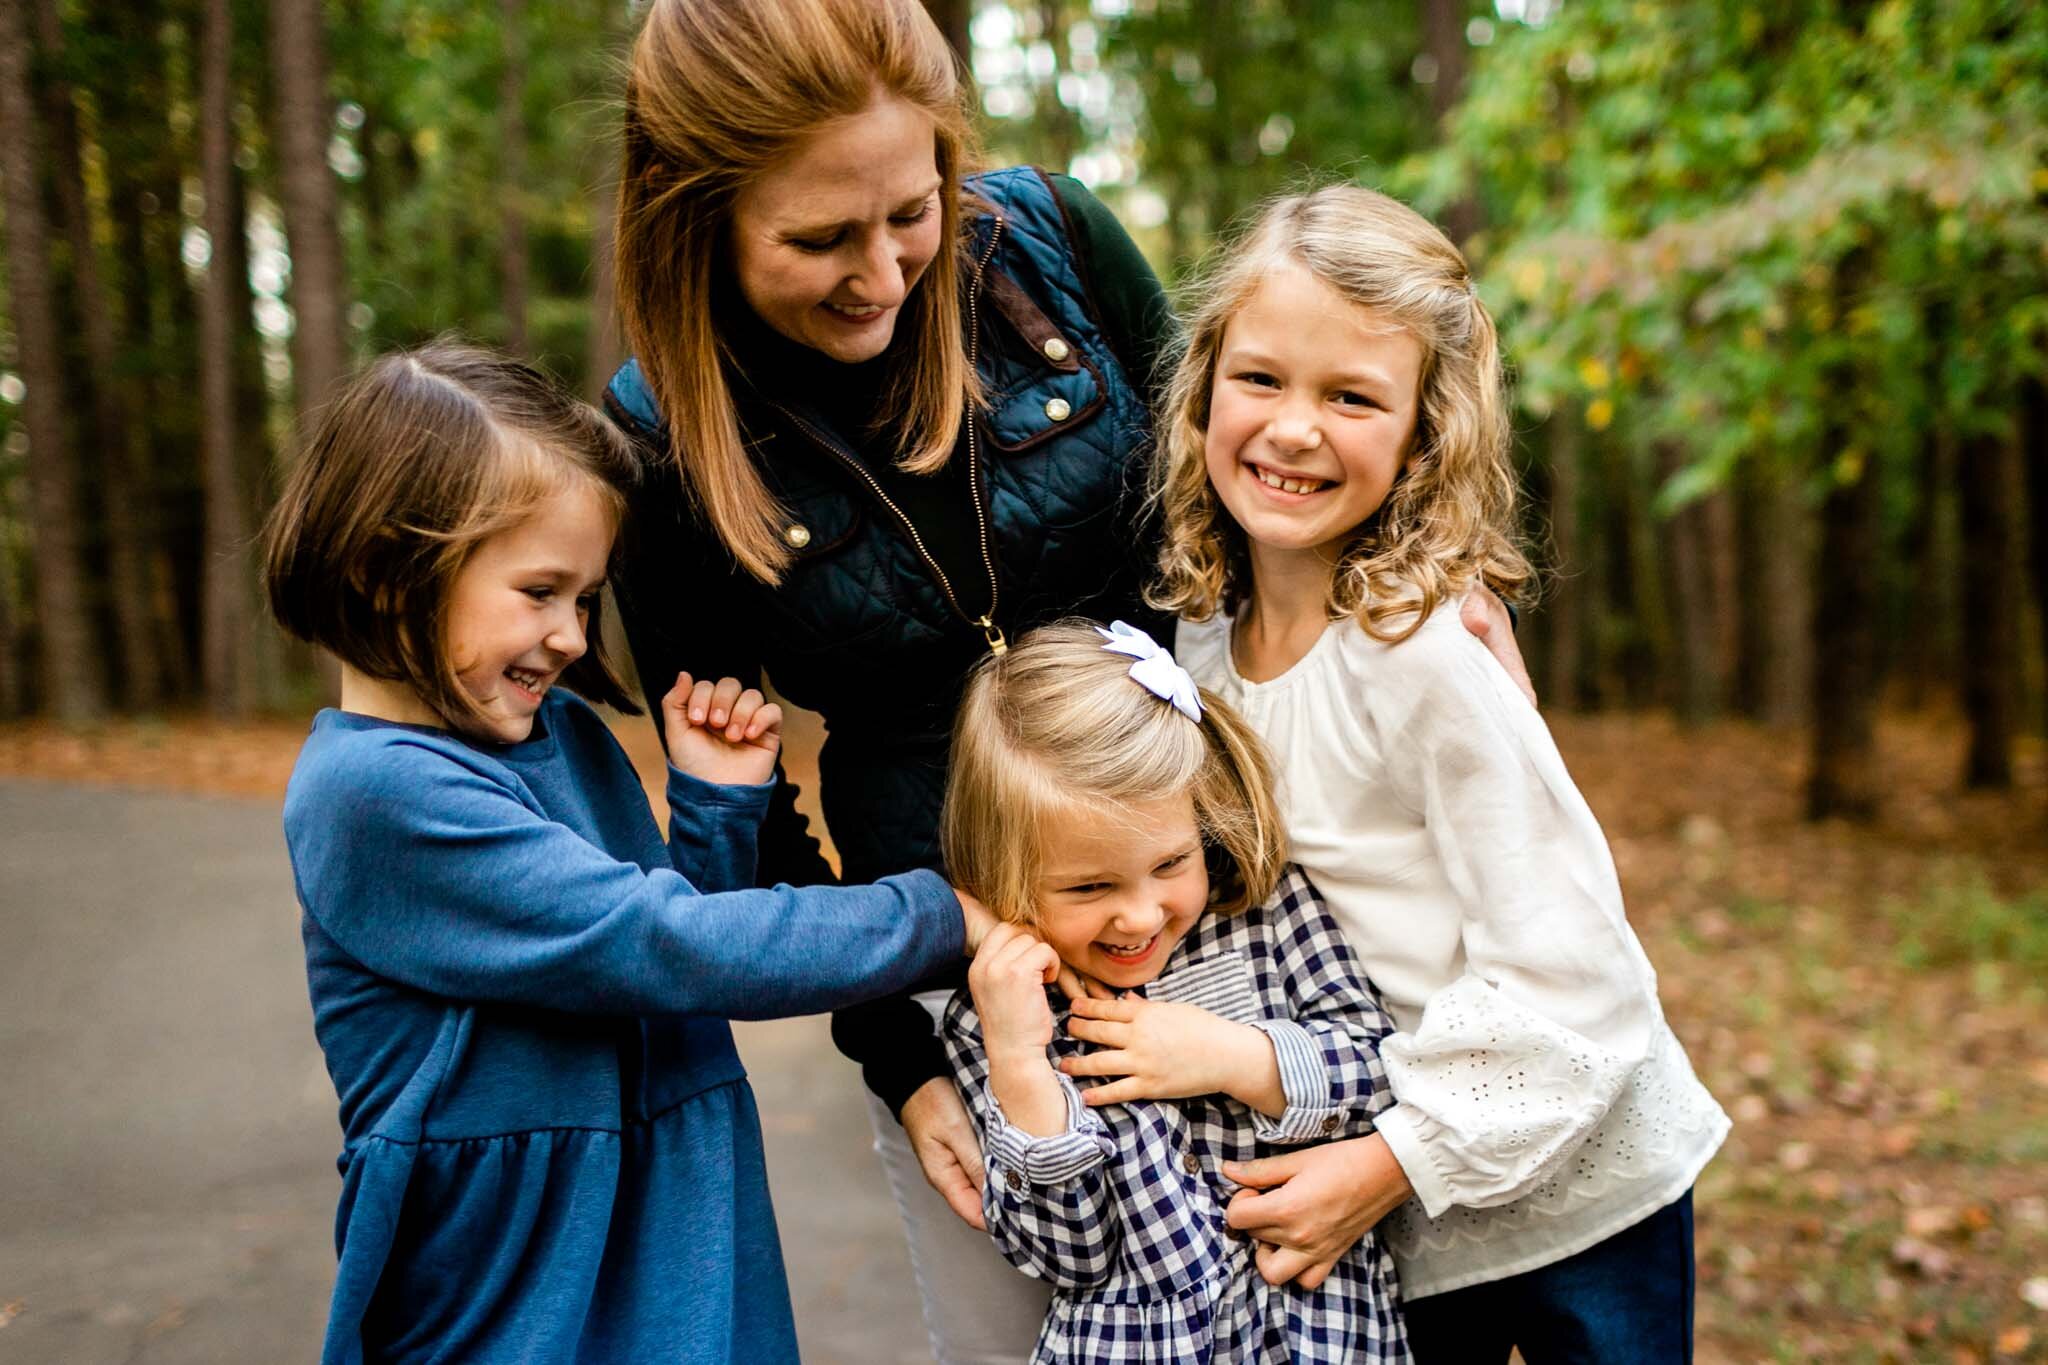 Raleigh Family Photographer | Umstead Park | By G. Lin Photography | Mother and daughters tickling each other